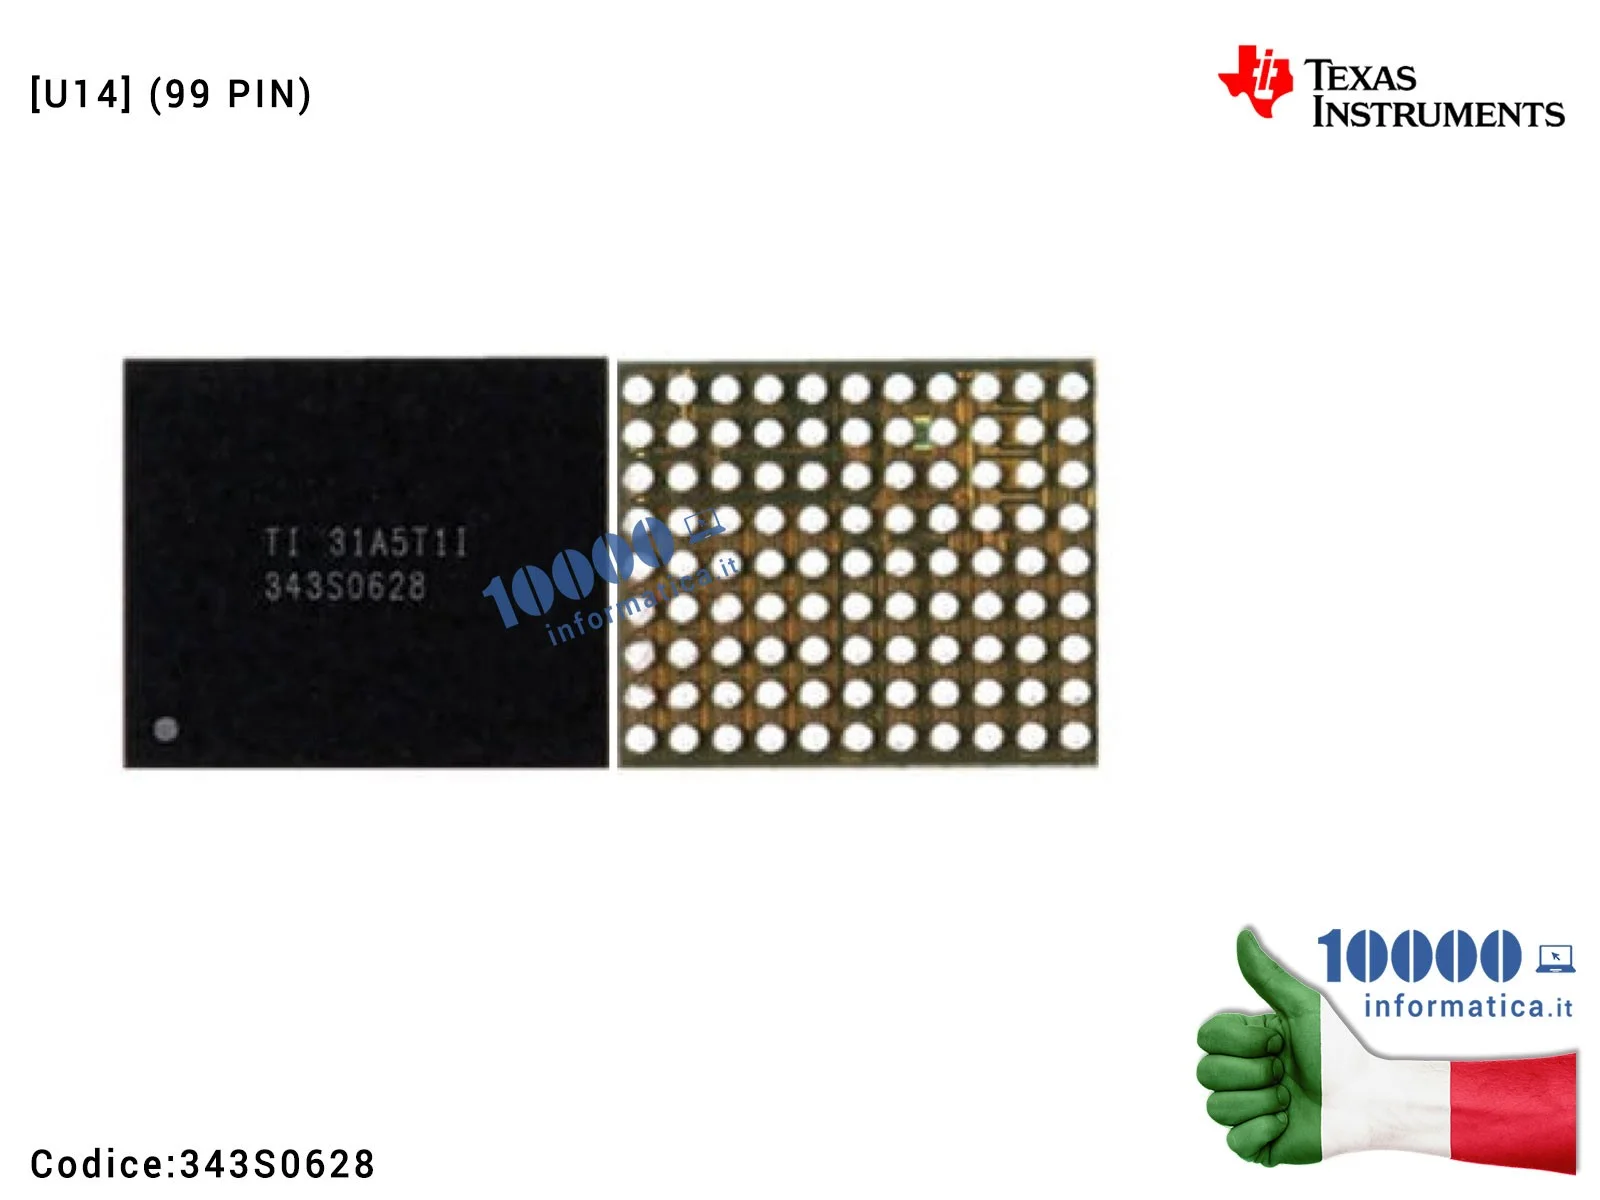 343S0628 IC Chip 343S0628 Touch Screen Controller SMD Fix per Scheda Madre iPhone 5 5G [U14] (99 PIN)